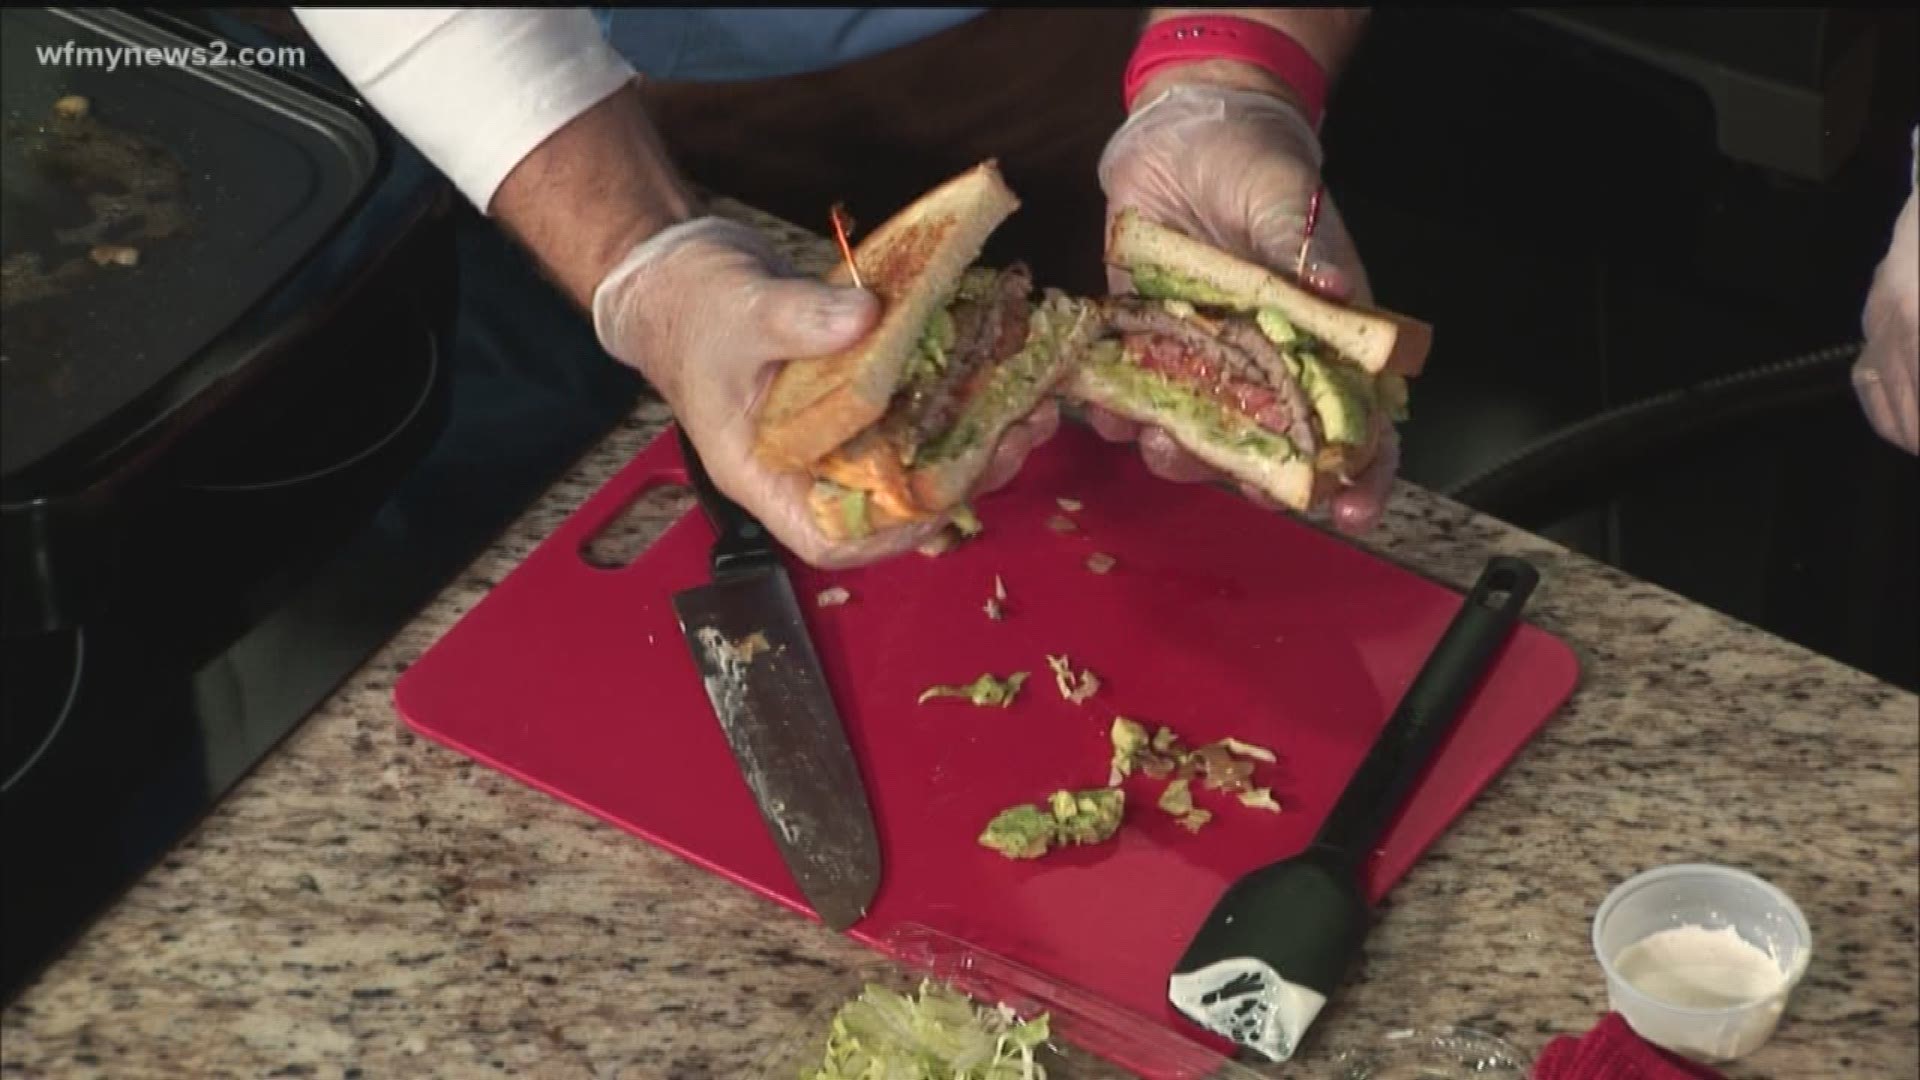 Habit Burger brings two west coast burger recipes to the News 2 Kitchen